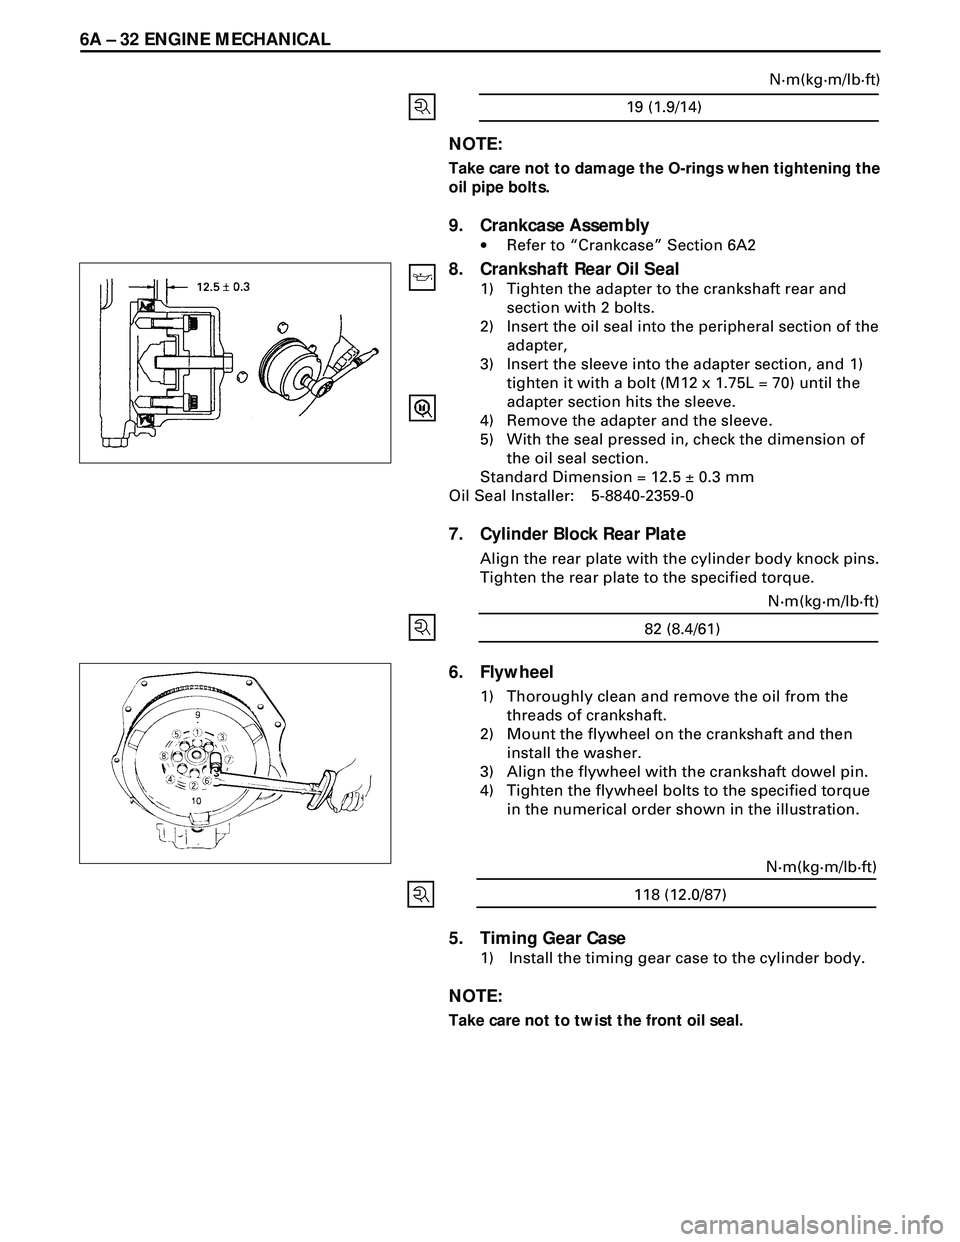 ISUZU TROOPER 1998  Service Service Manual 6A Ð 32 ENGINE MECHANICAL
19 (1.9/14)N·m(kg·m/lb·ft)
5. Timing Gear Case
1) Install the timing gear case to the cylinder body.
NOTE:
Take care not to twist the front oil seal.
6. Flywheel
1) Thoro